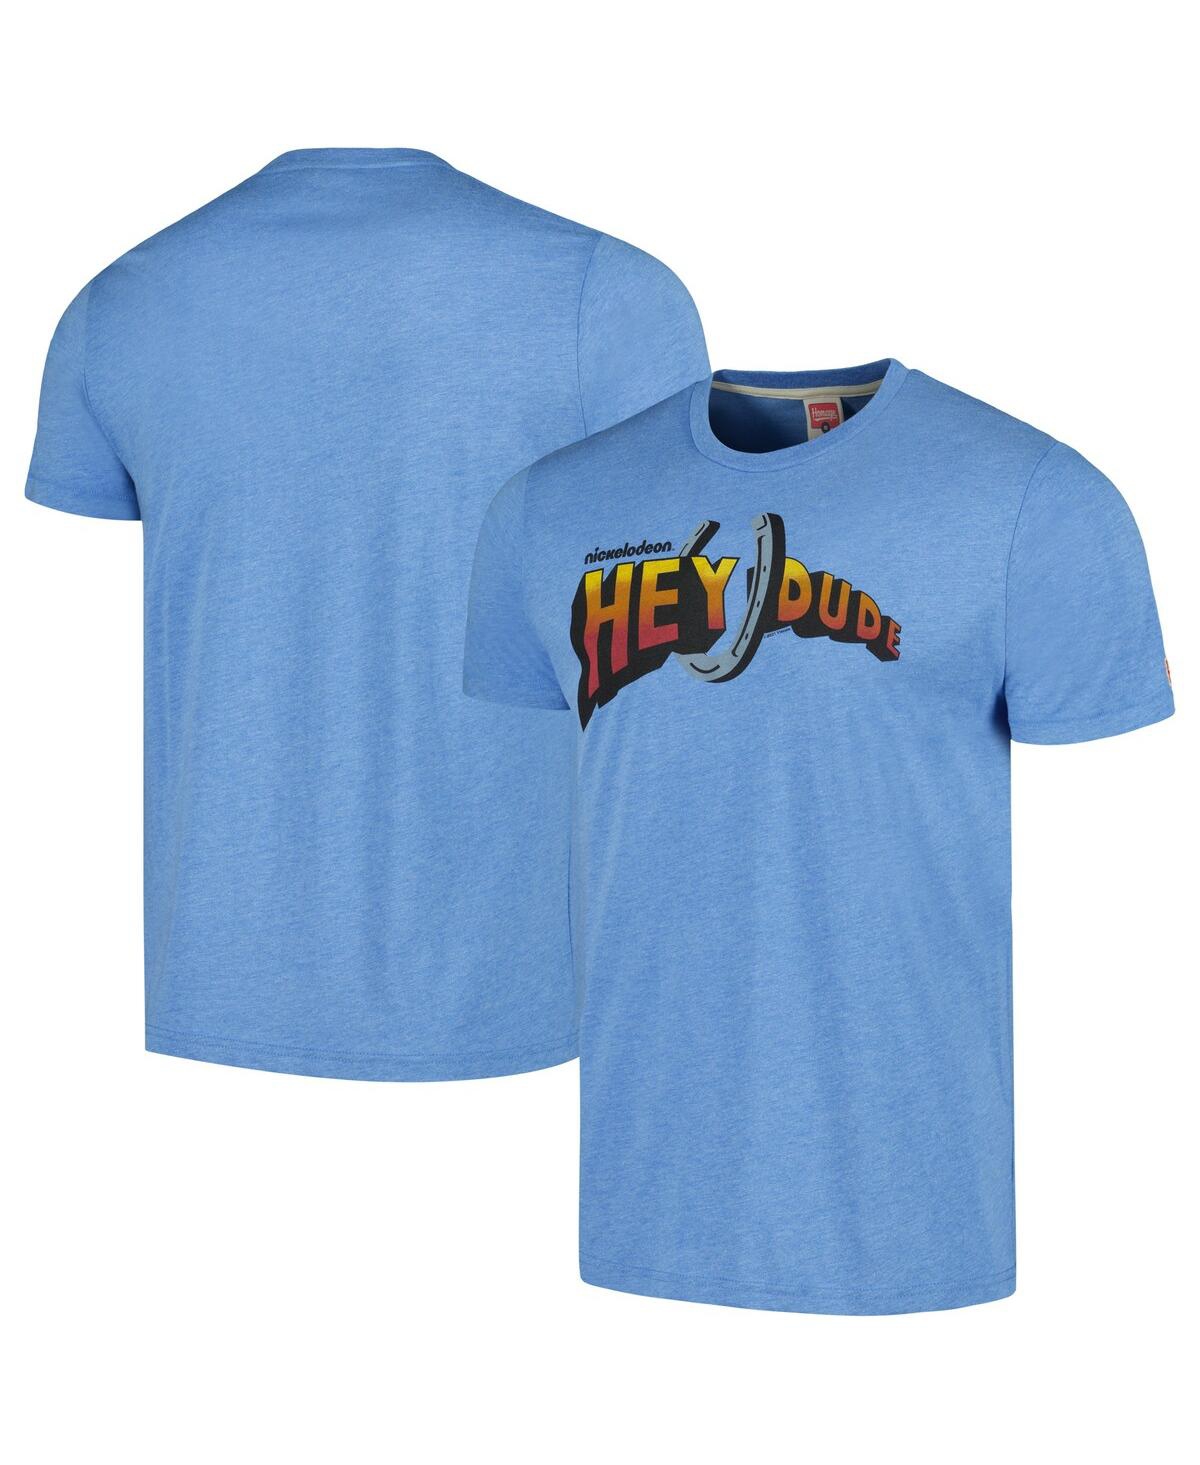 Homage Men's And Women's  Light Blue Hey Dude Graphic Tri-blend T-shirt